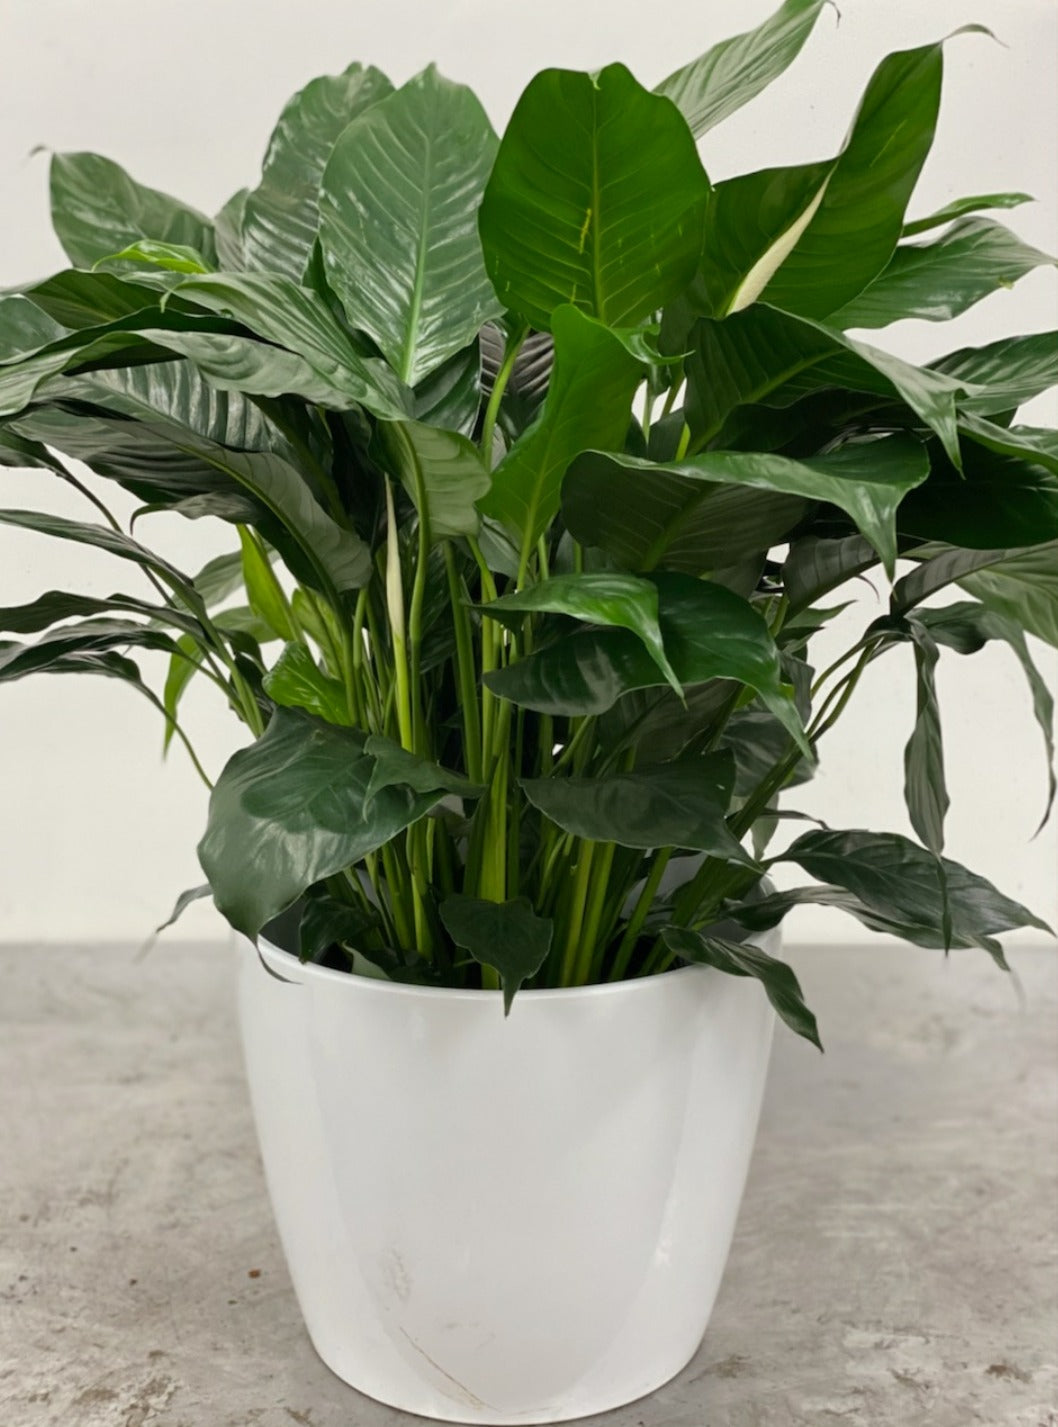 10" Peace Lily in black grower's pot